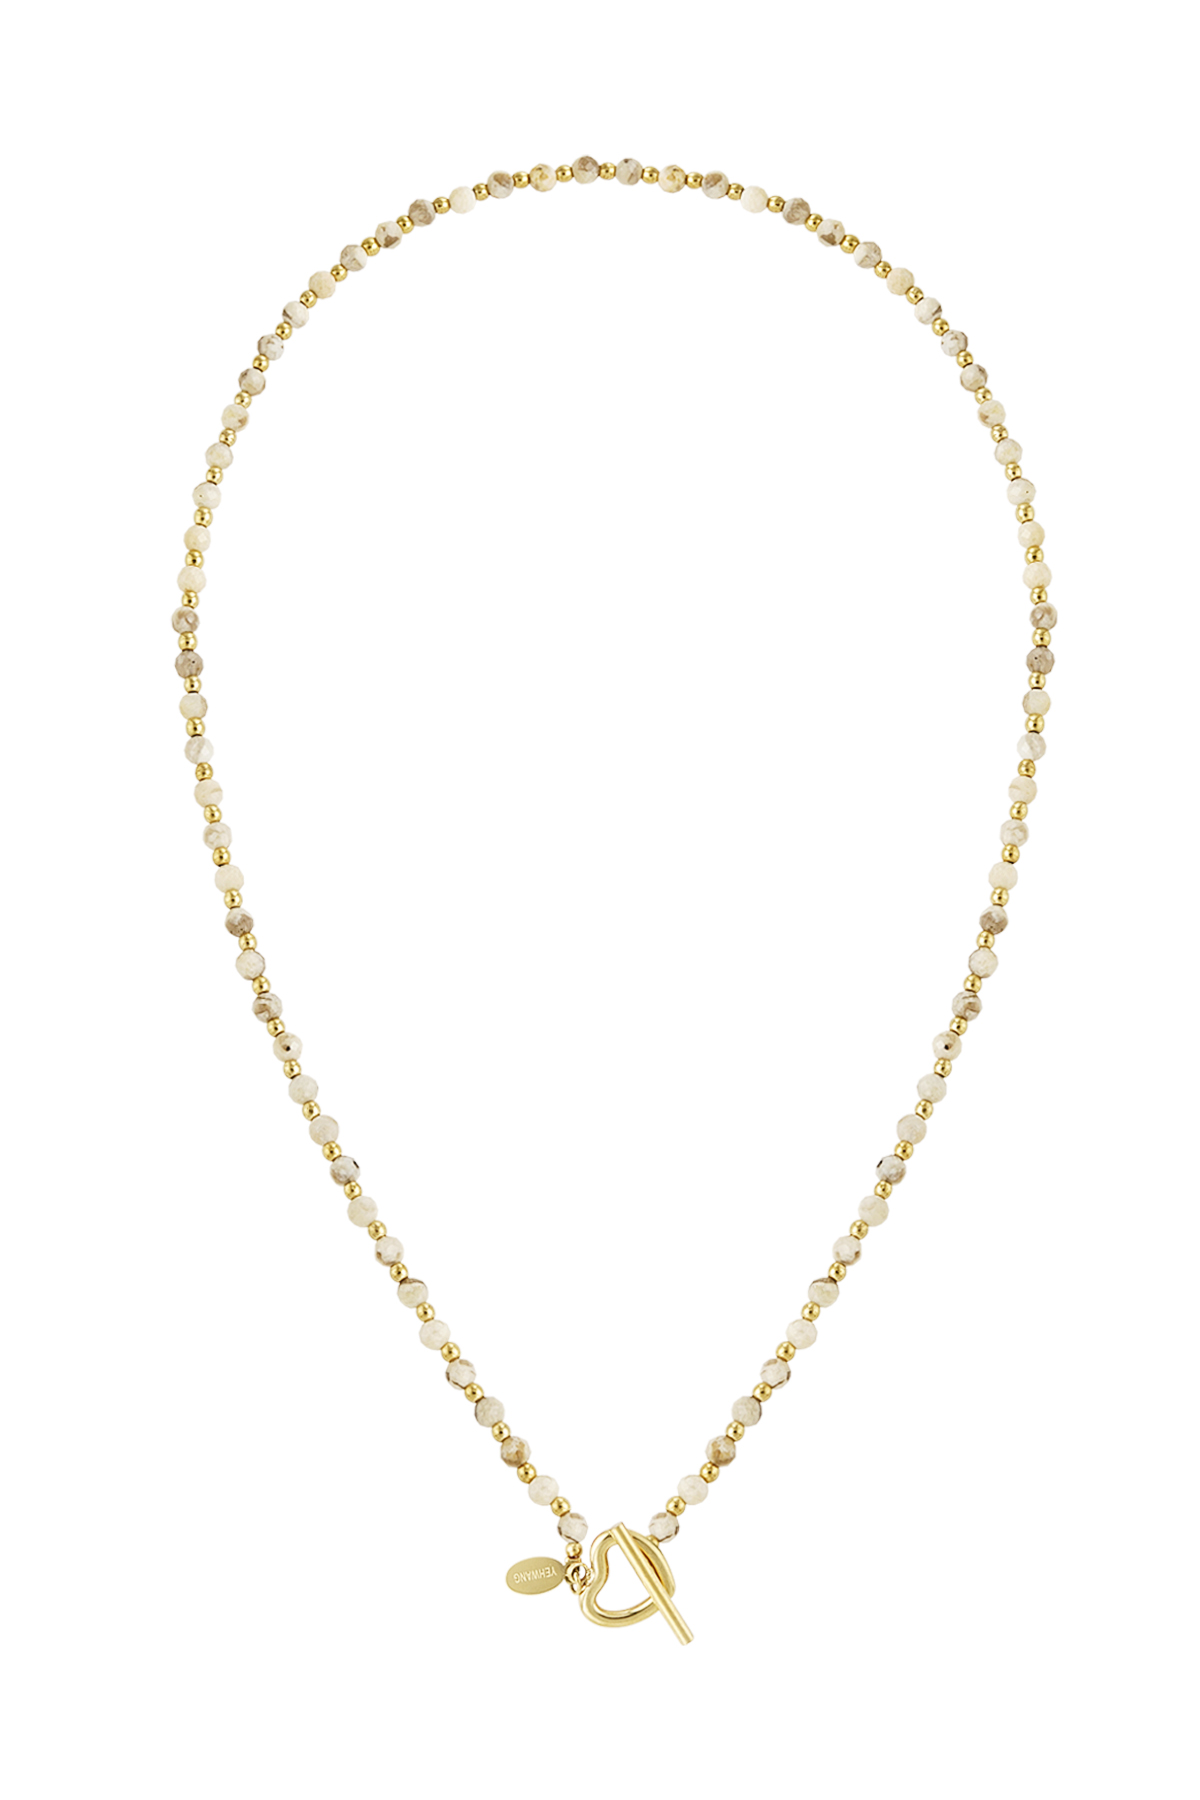 Bead chain heart clasp - beige &amp; gold Stainless Steel